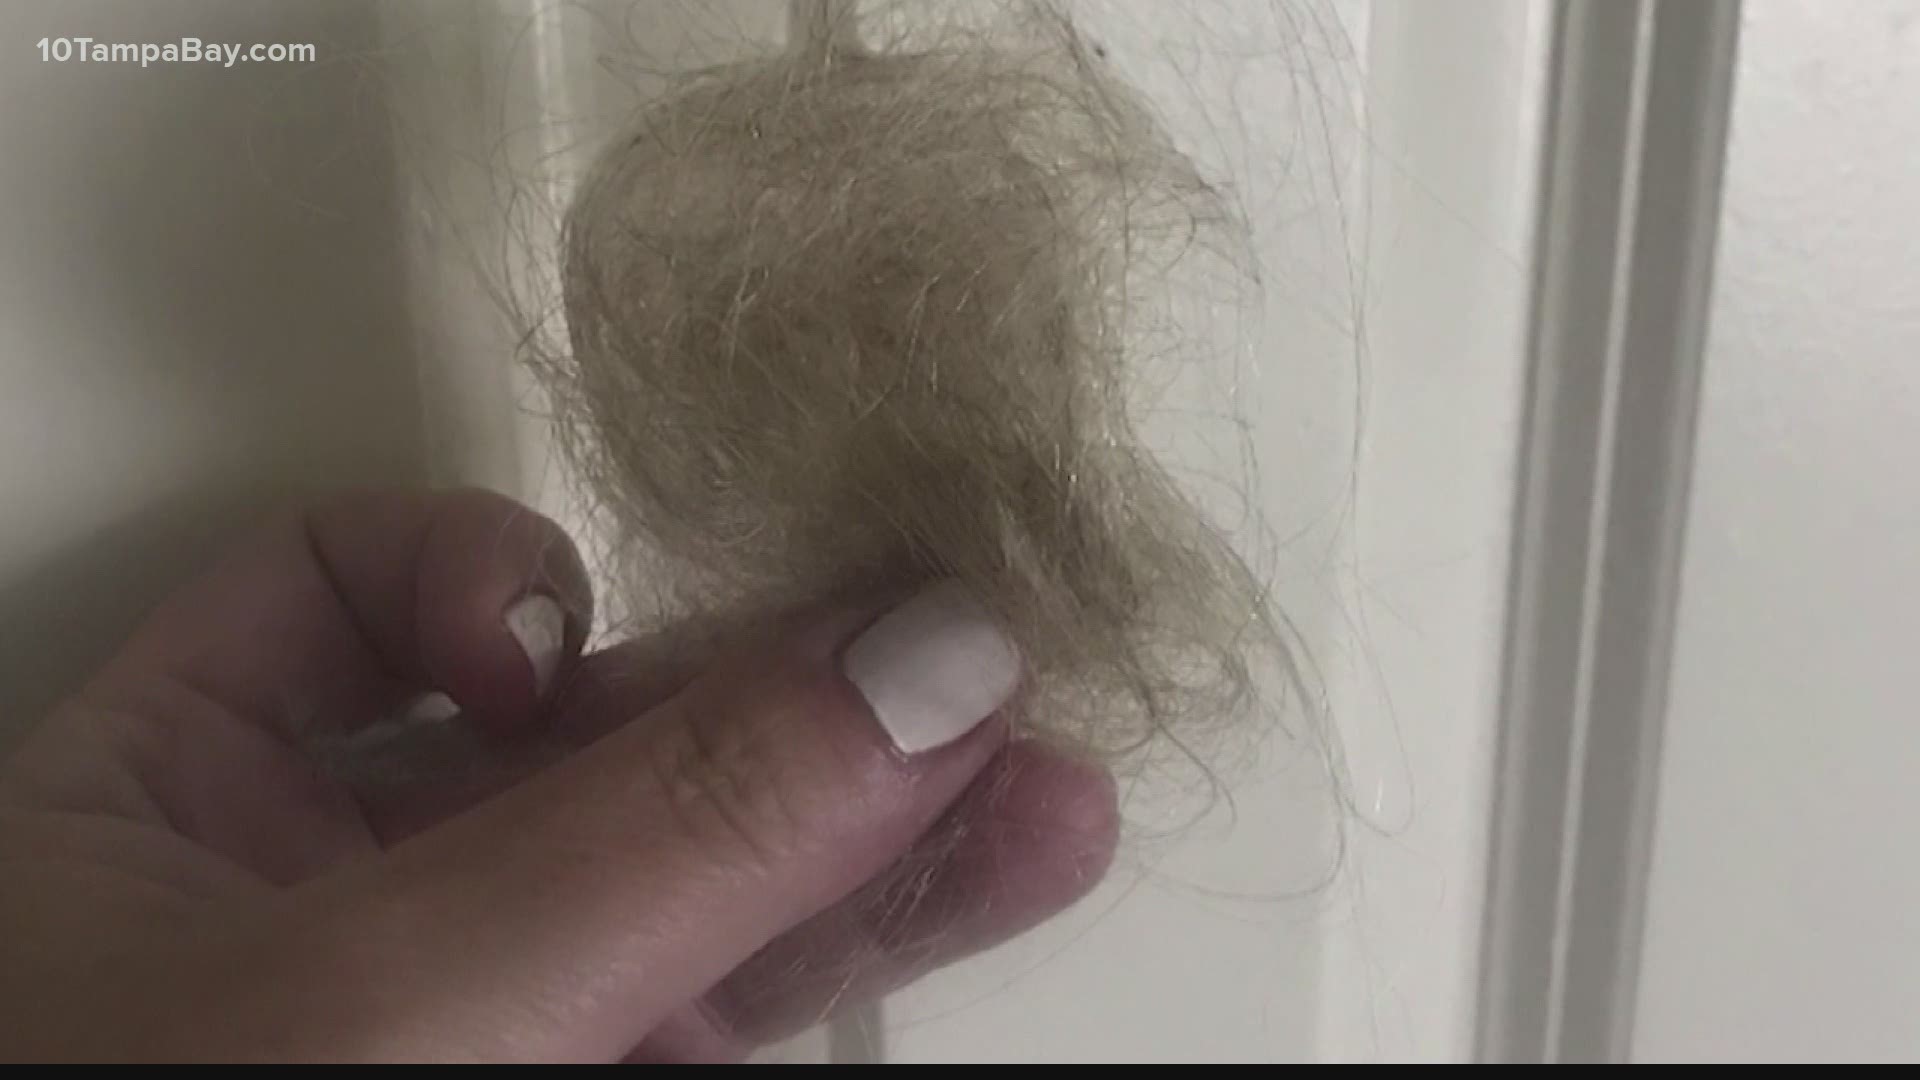 A Florida woman shares her story of hair loss months after having COVID-19 and what can be done to help boost your hair growth and confidence.